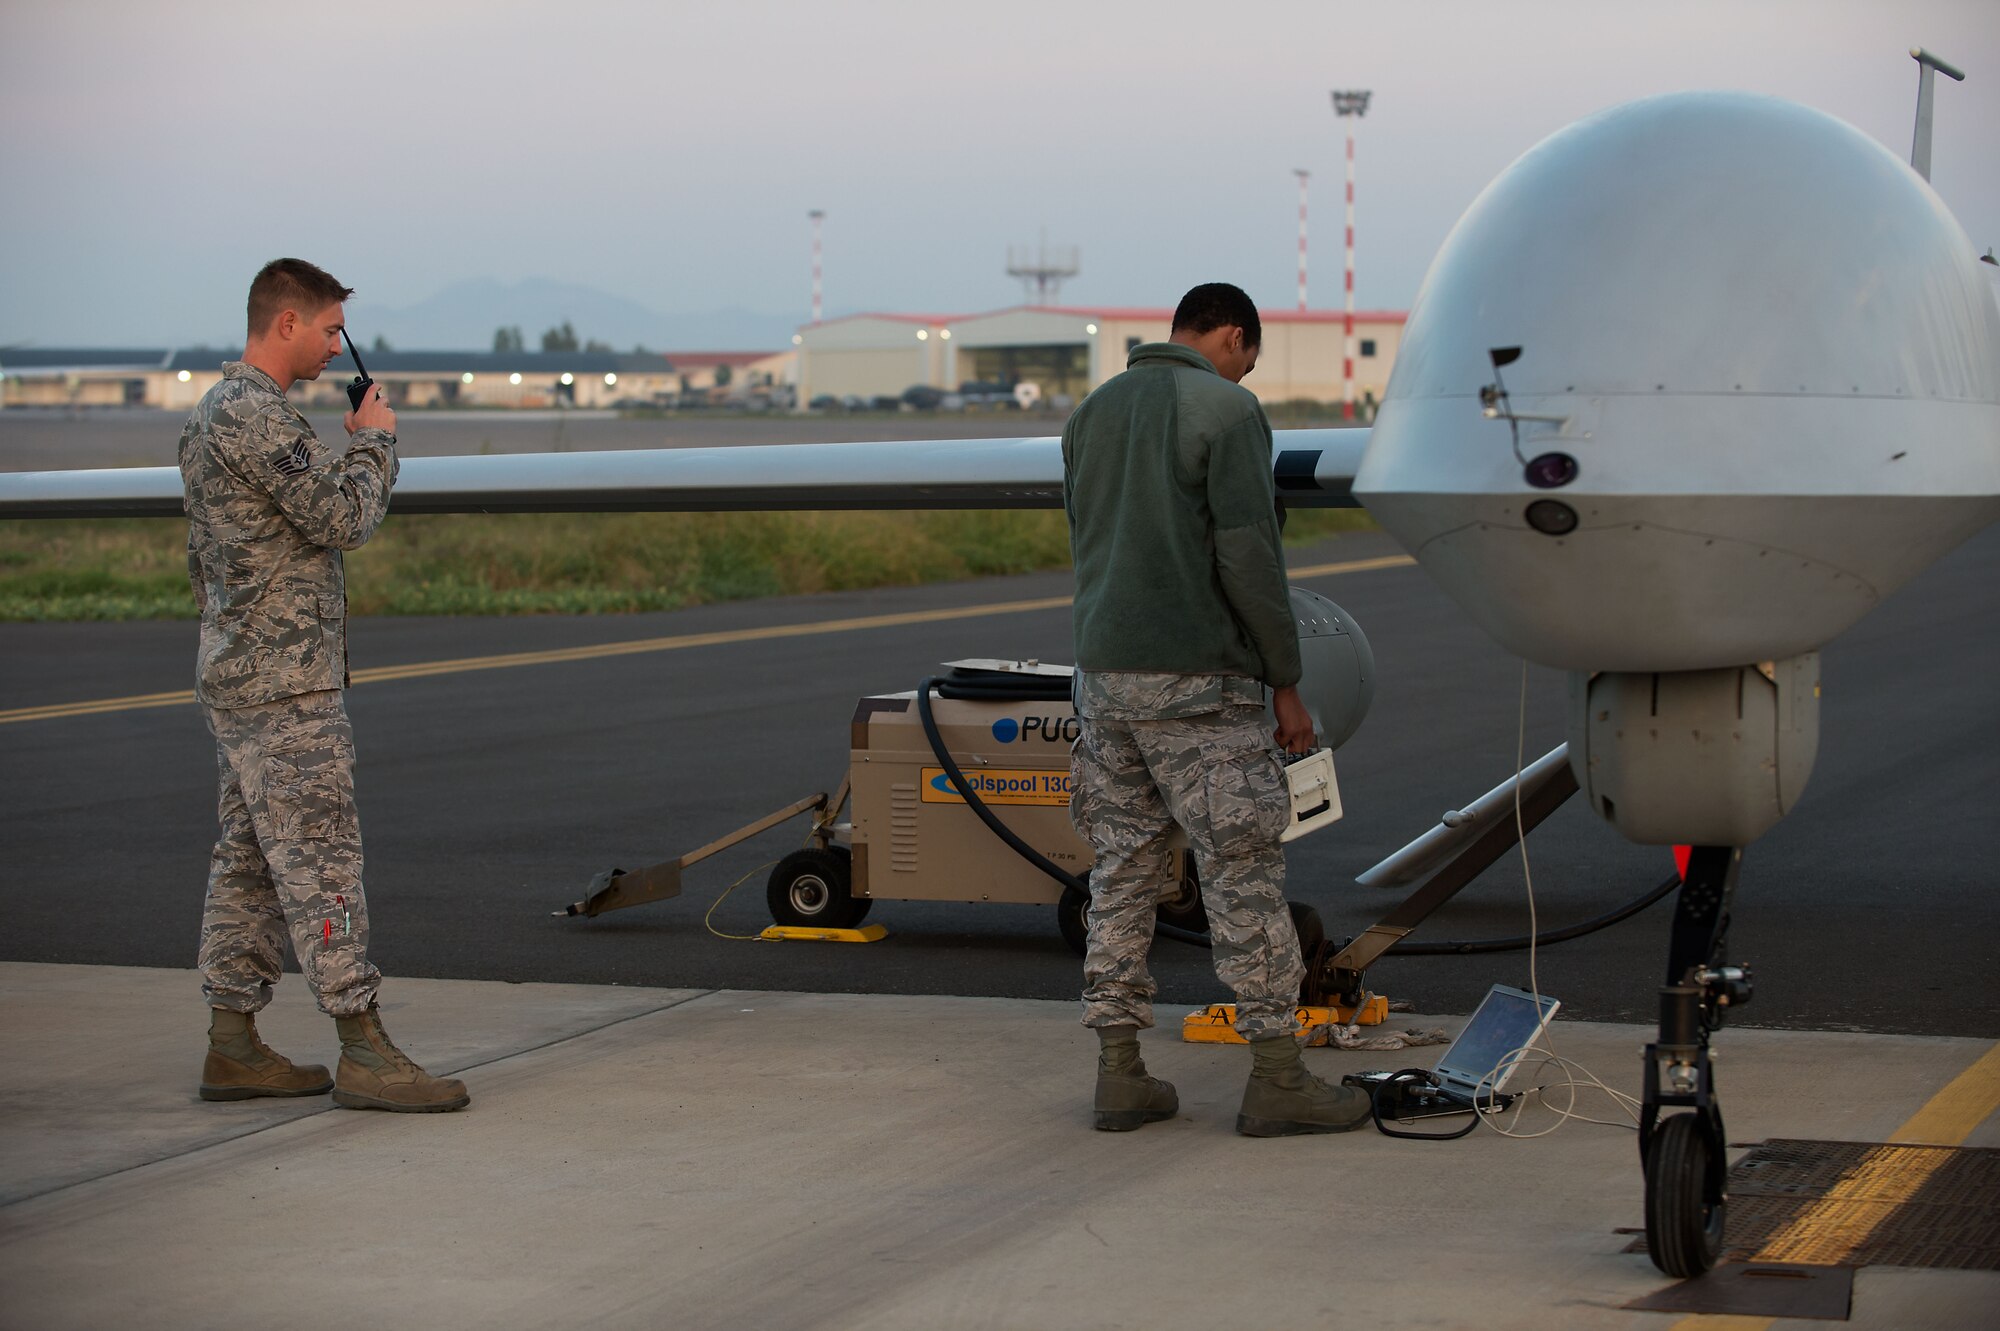 Airmen attached to the 324th Expeditionary Reconnaissance Squadron, based out of 432nd Wing/432nd Air Expeditionary Wing at Creech Air Force Base, Nev., perform a preflight inspection on an MQ-1 Predator remotely piloted aircraft as the wing passed the 2 million flying hour milestone Oct. 22, 2013. Since initial operations began in 1995 to April 2011 the wing flew their first 1 million hours. Due in large part to total force integration efforts and an expansion of combat air patrols the 2 million hour mark was achieved 32 months later, culminating in more than 215,000 total missions completed and nearly 94-percent of all missions flown in support of major combat operations.  (U.S. Navy photo by Mass Communication Specialist 2nd Class Brian T. Glunt/Released)
 
